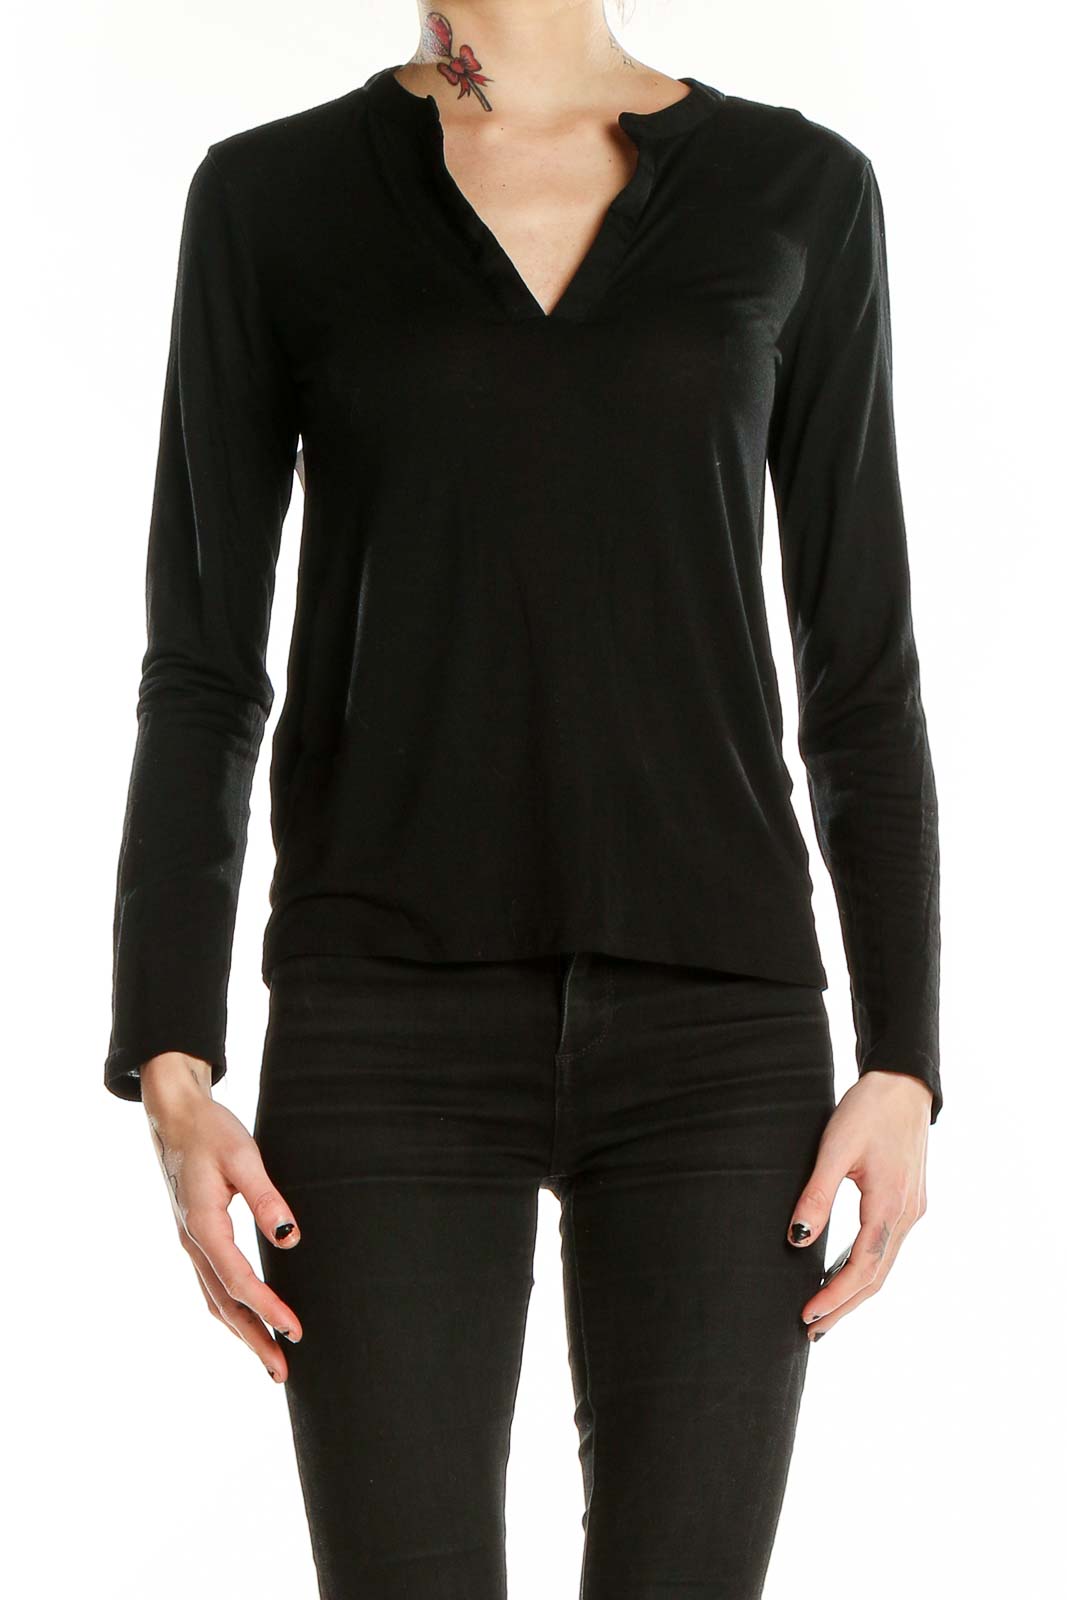 Black Solid Top Front